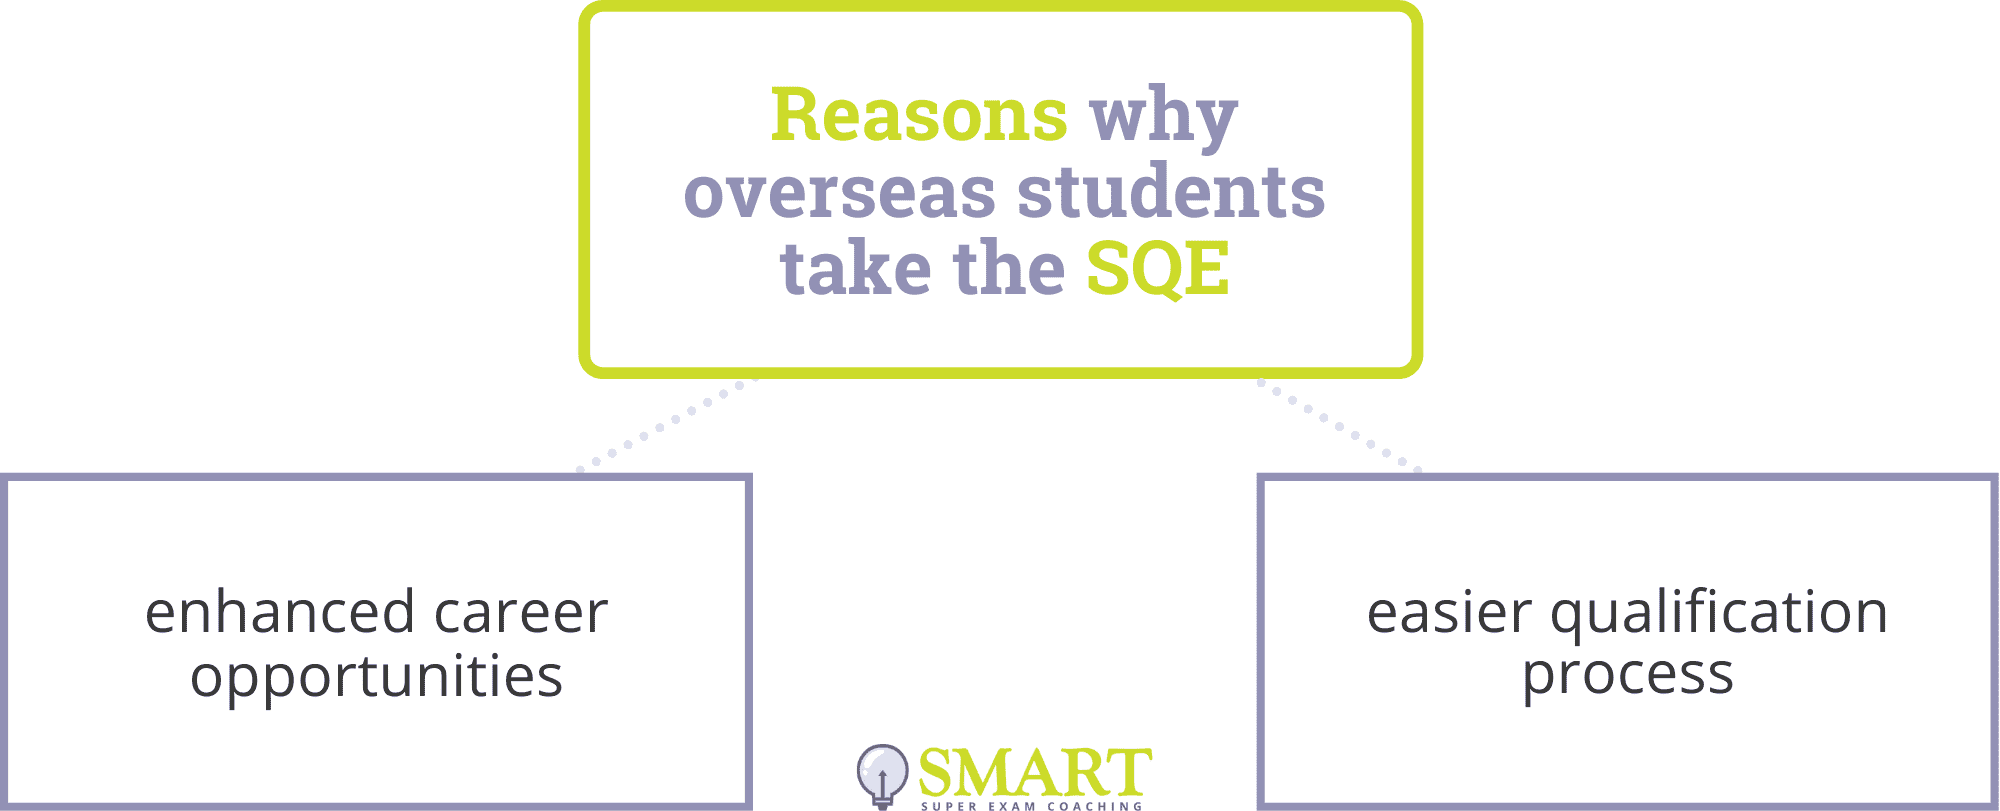 Reasons Why Overseas Students Take the SQE